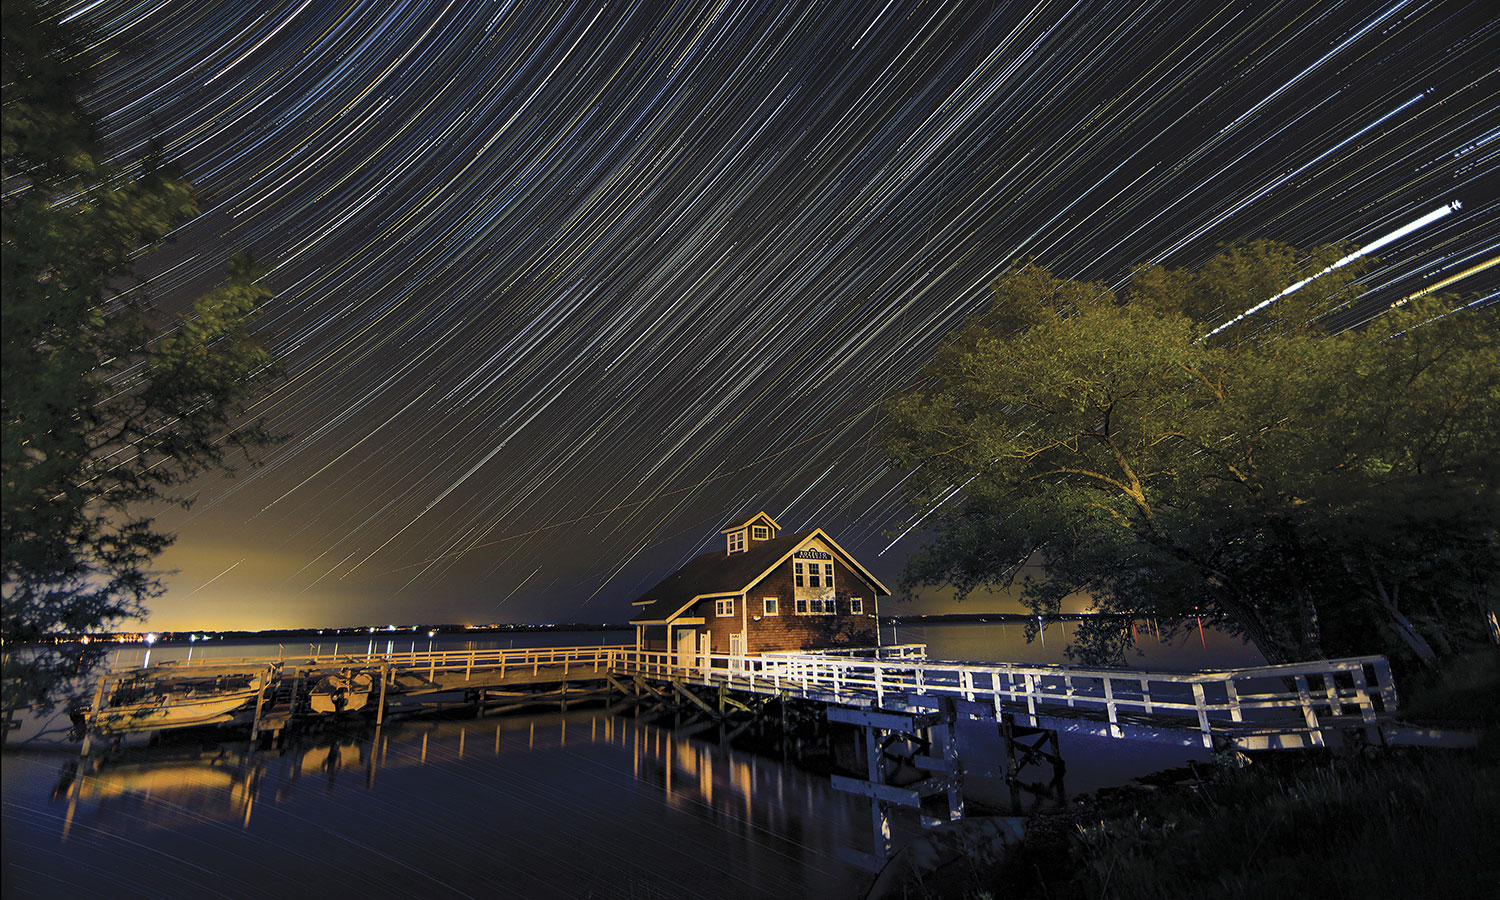 Star trails over the Bozzuto Boathouse